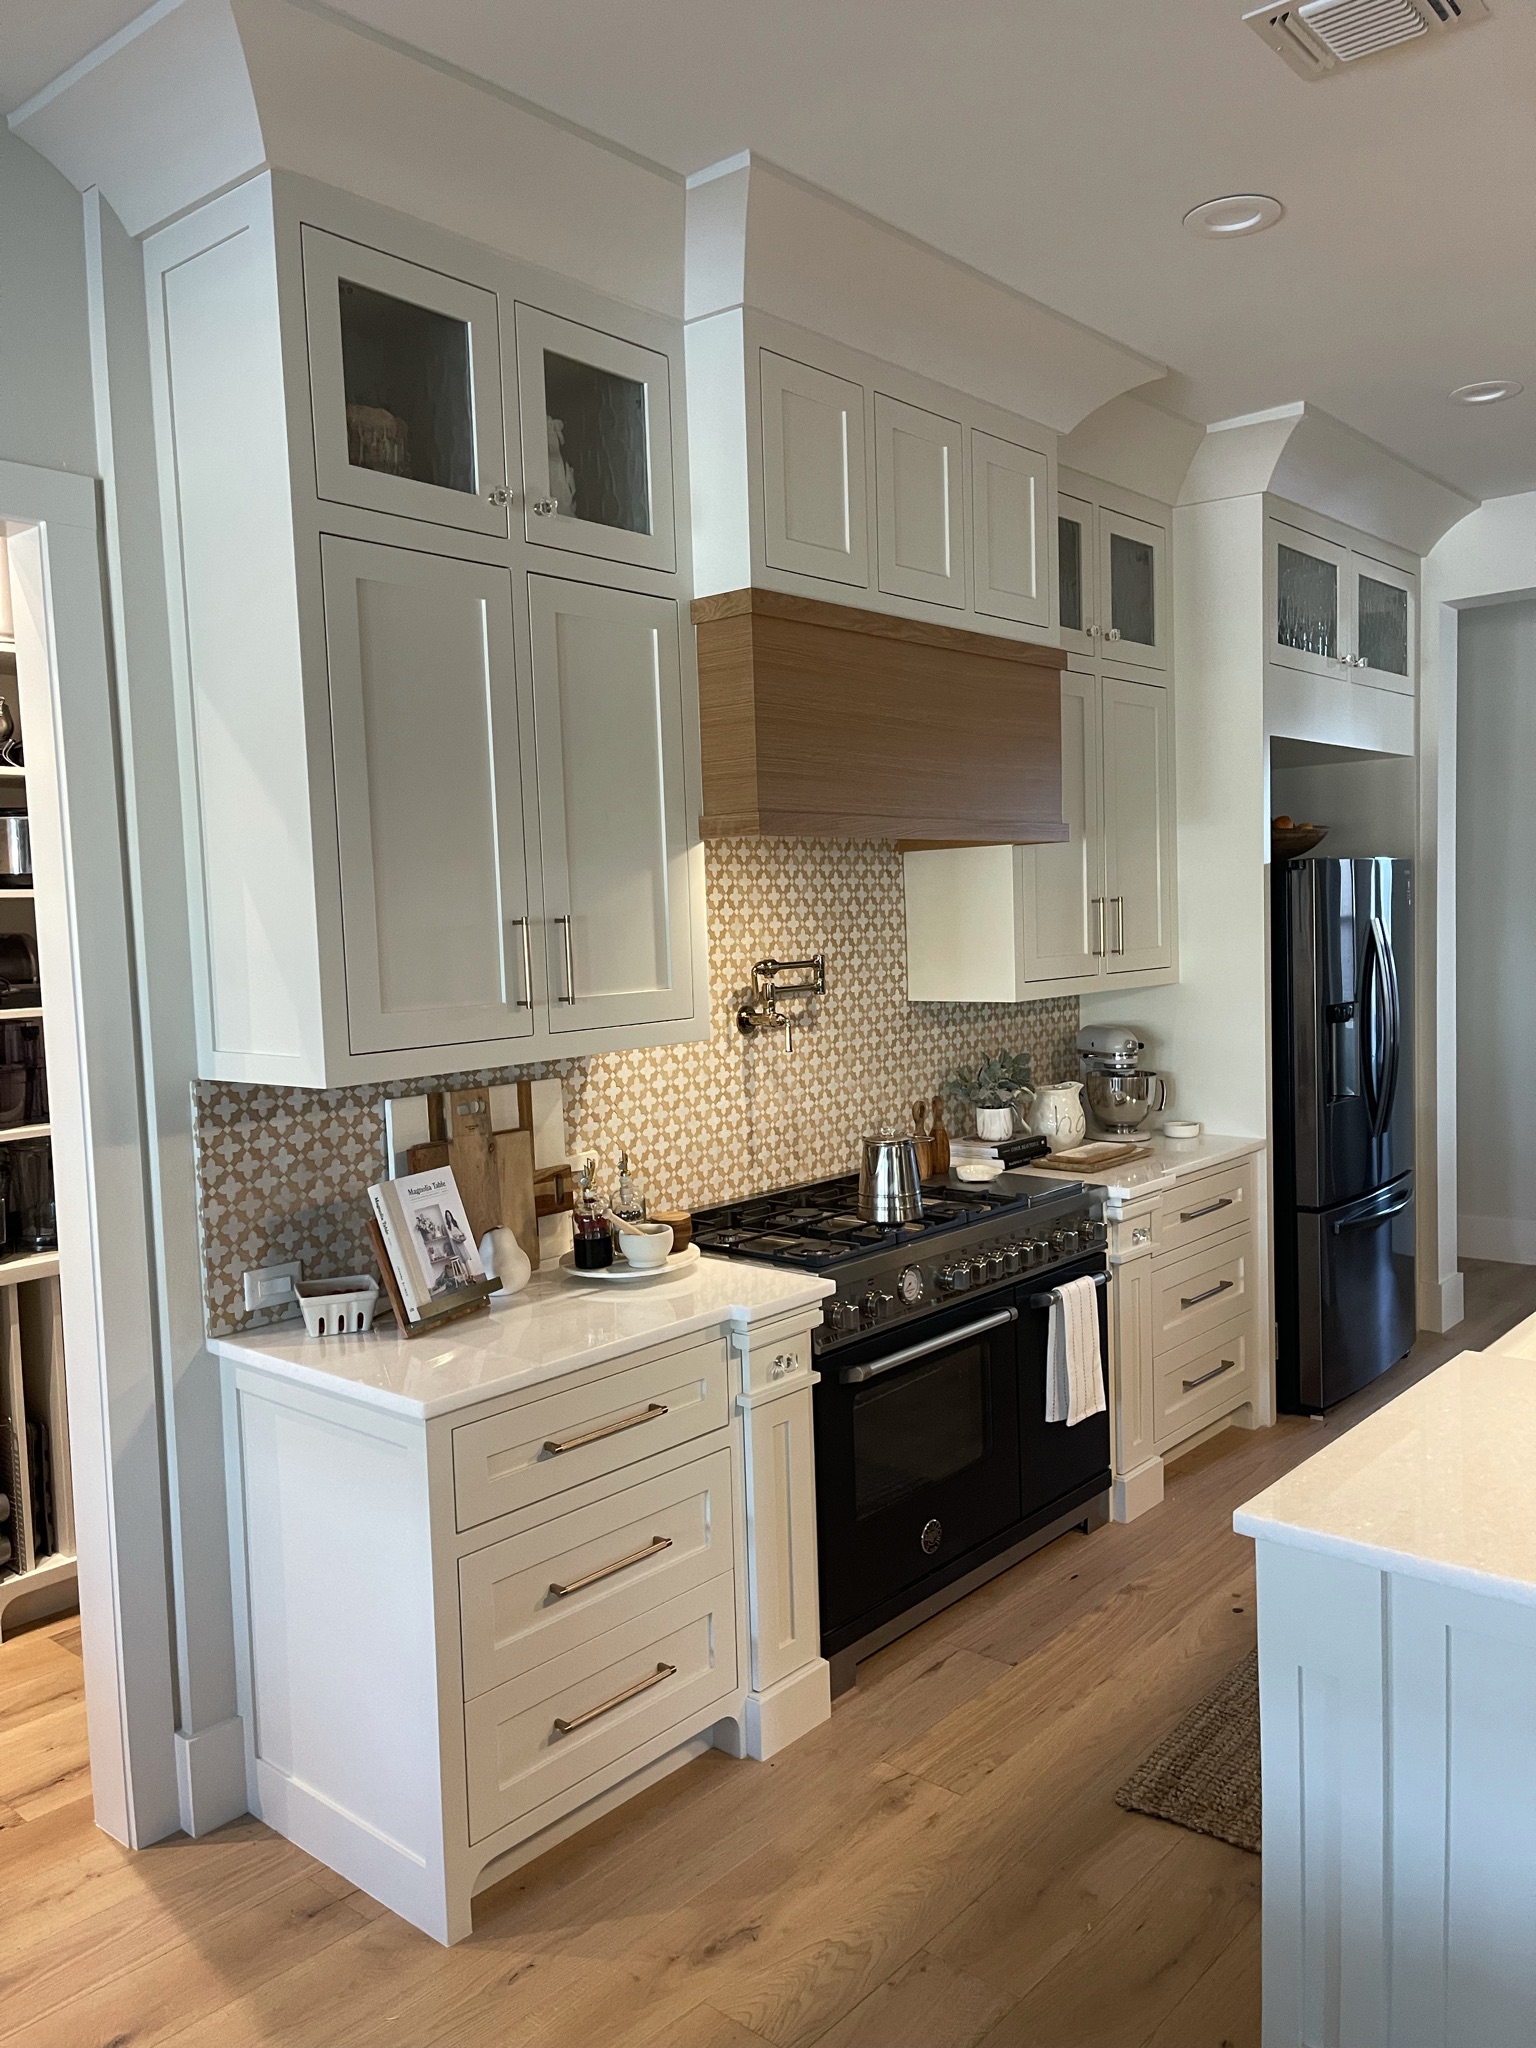 Modern Farmhouse Kitchen Cabinetry with Silver Pulls with Wooden Range Hood Above Oven.